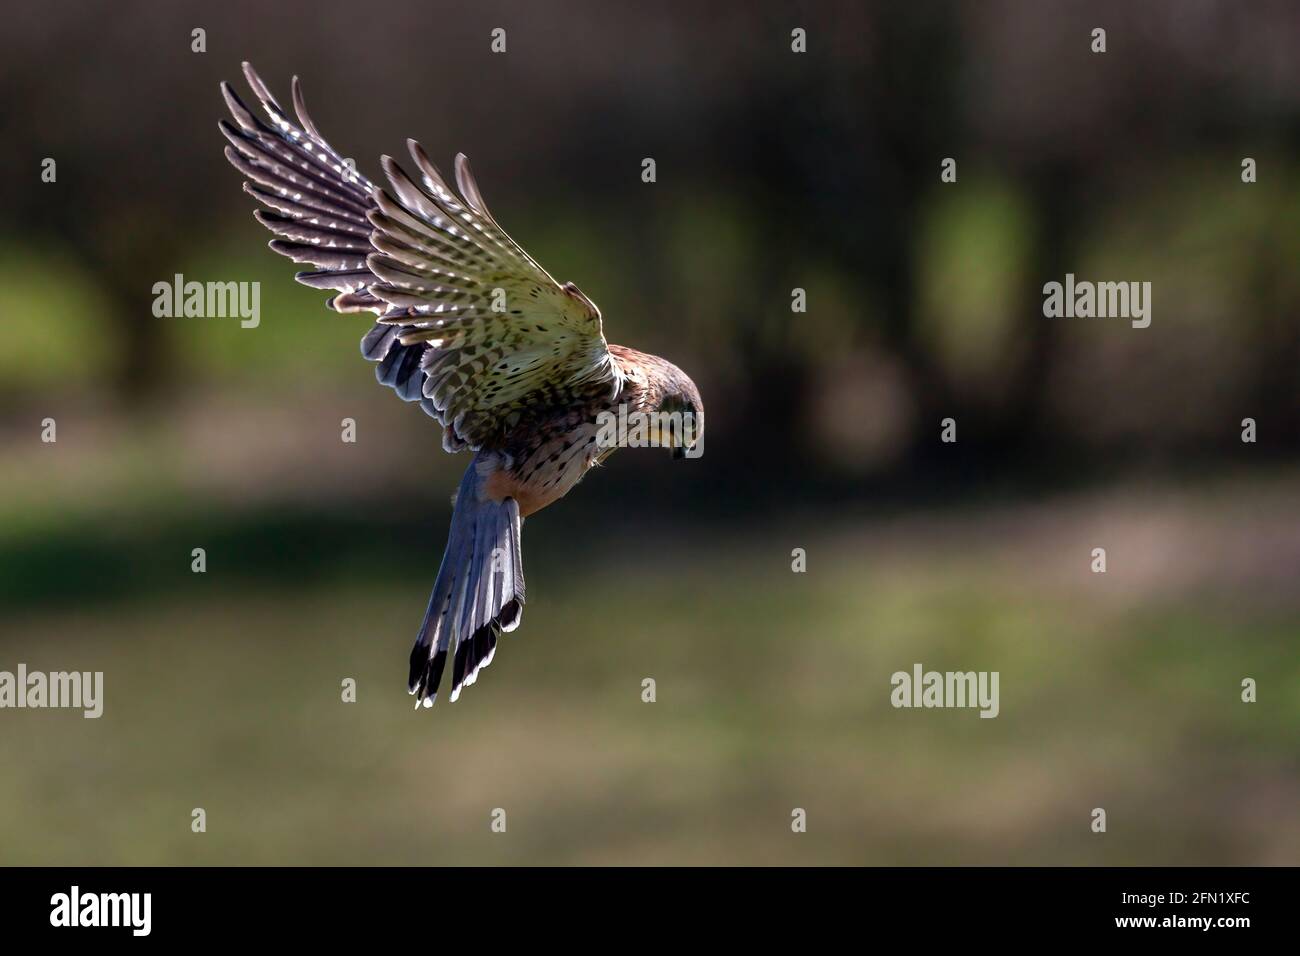 Kestrel (Falco tinnunculus) bird of prey hovering in flight with copy space, stock photo image Stock Photo